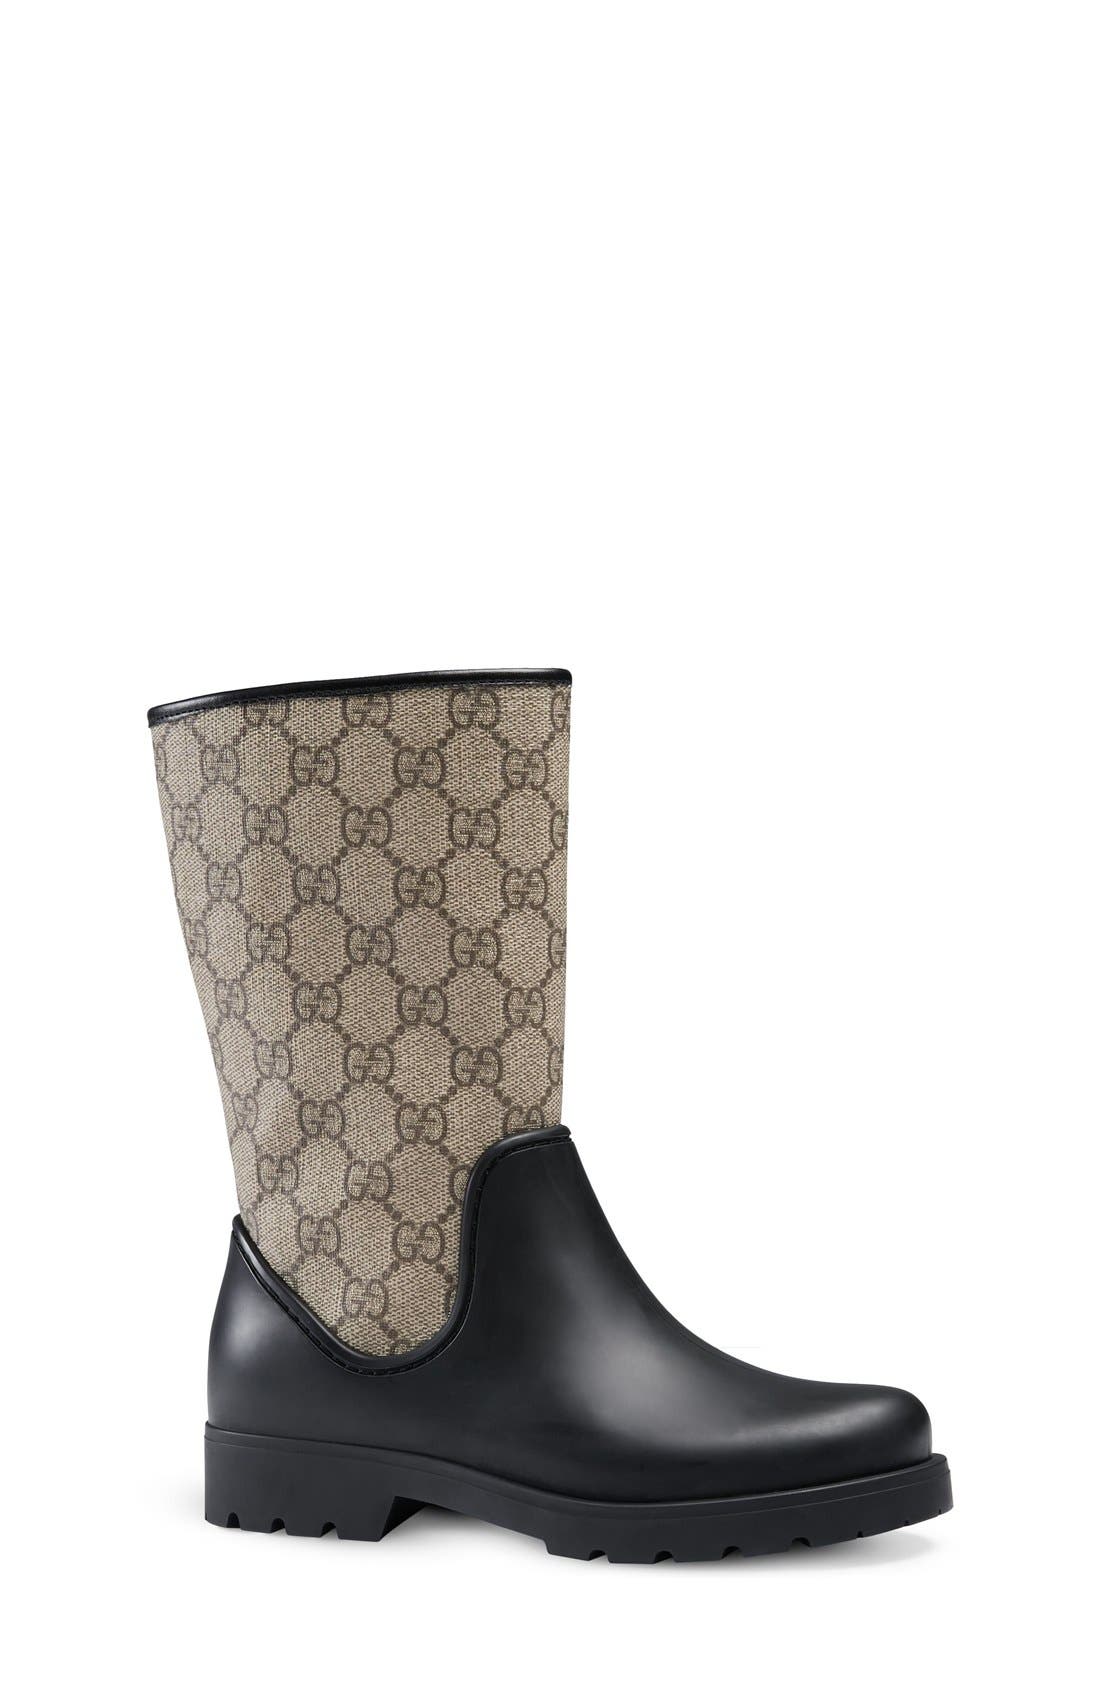 gucci rain boots for toddlers